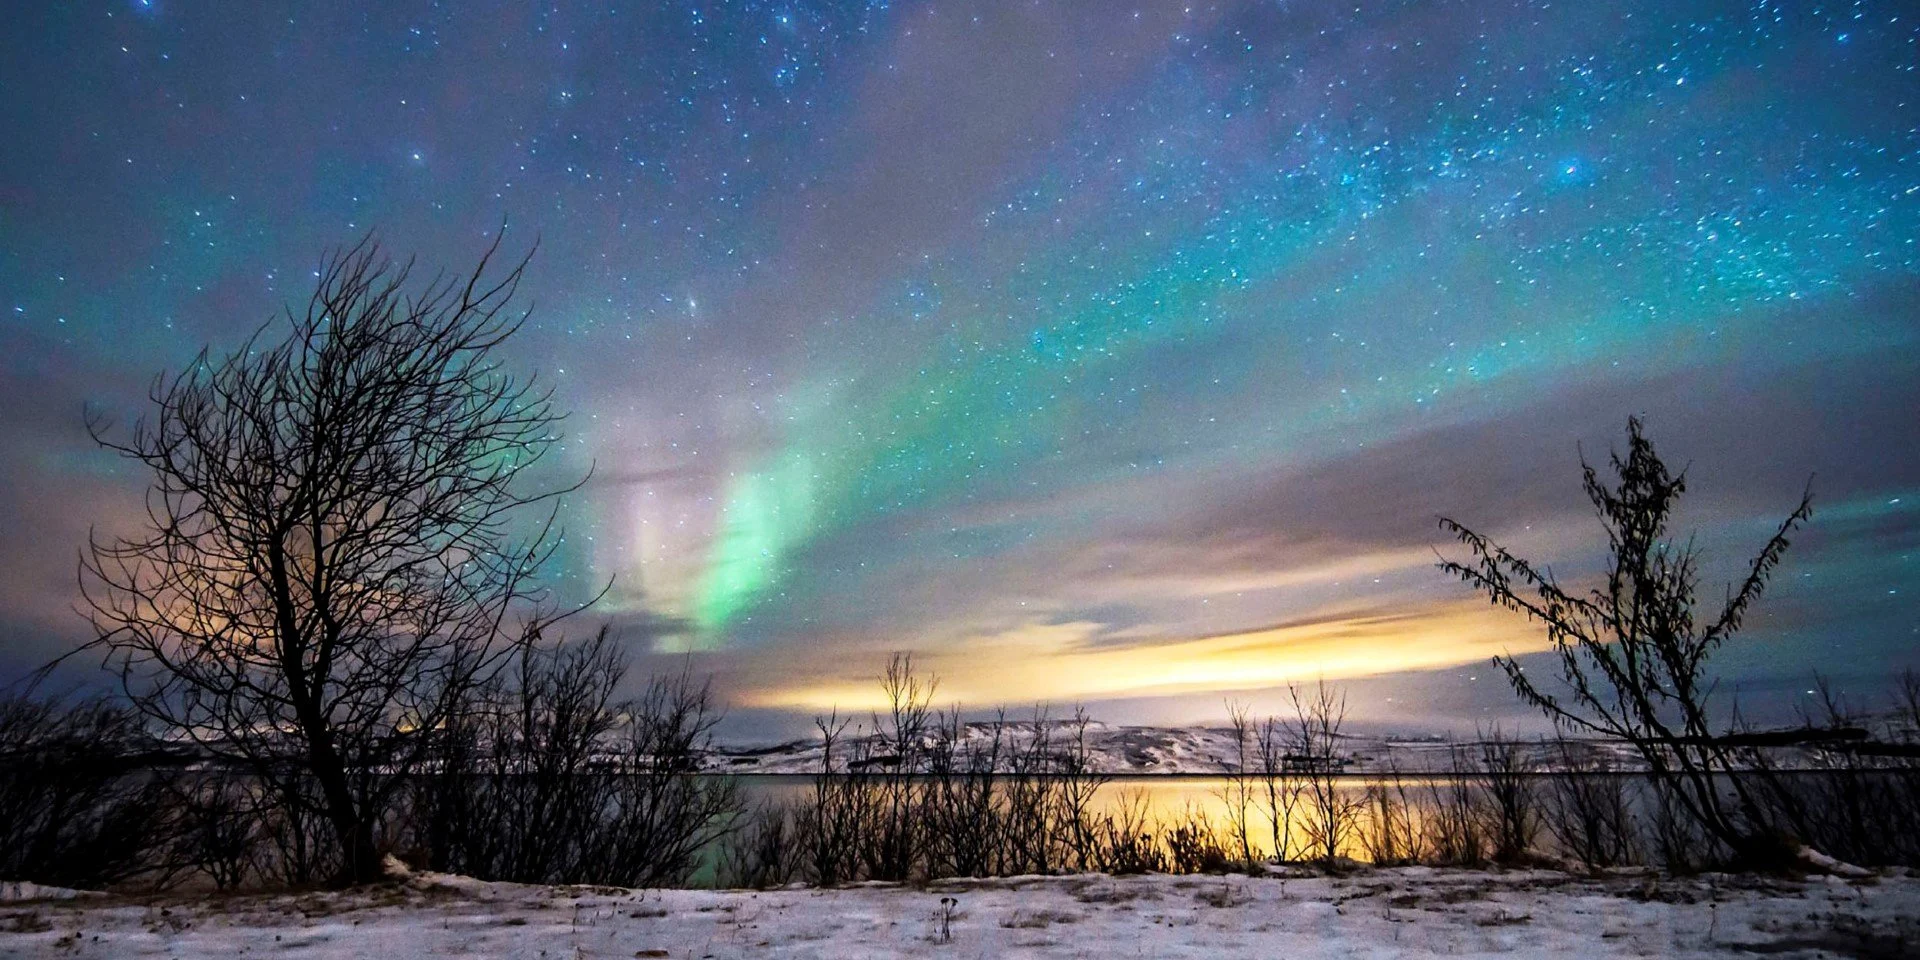 Experience the Northern Lights in Norway